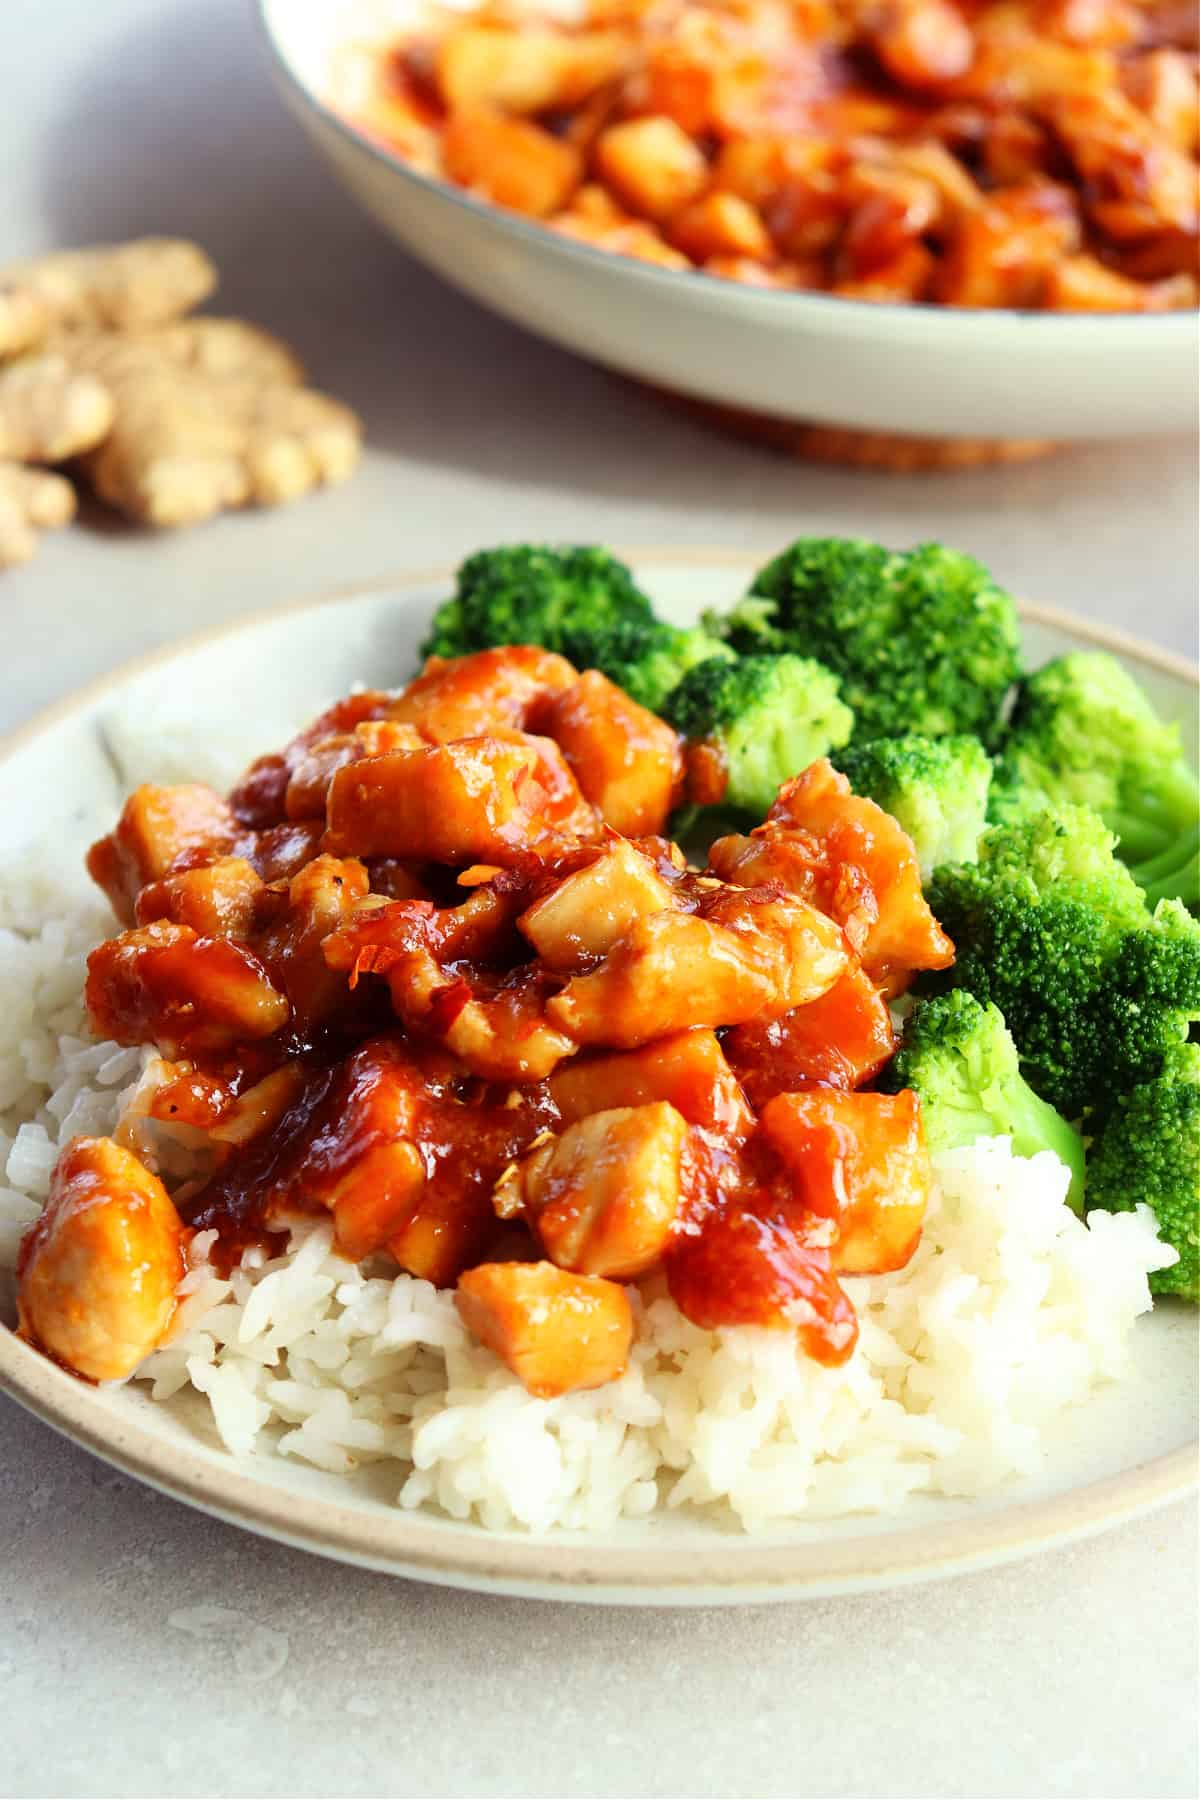 Ginger soy chicken on top of rice with broccoli on the side, on a plate.